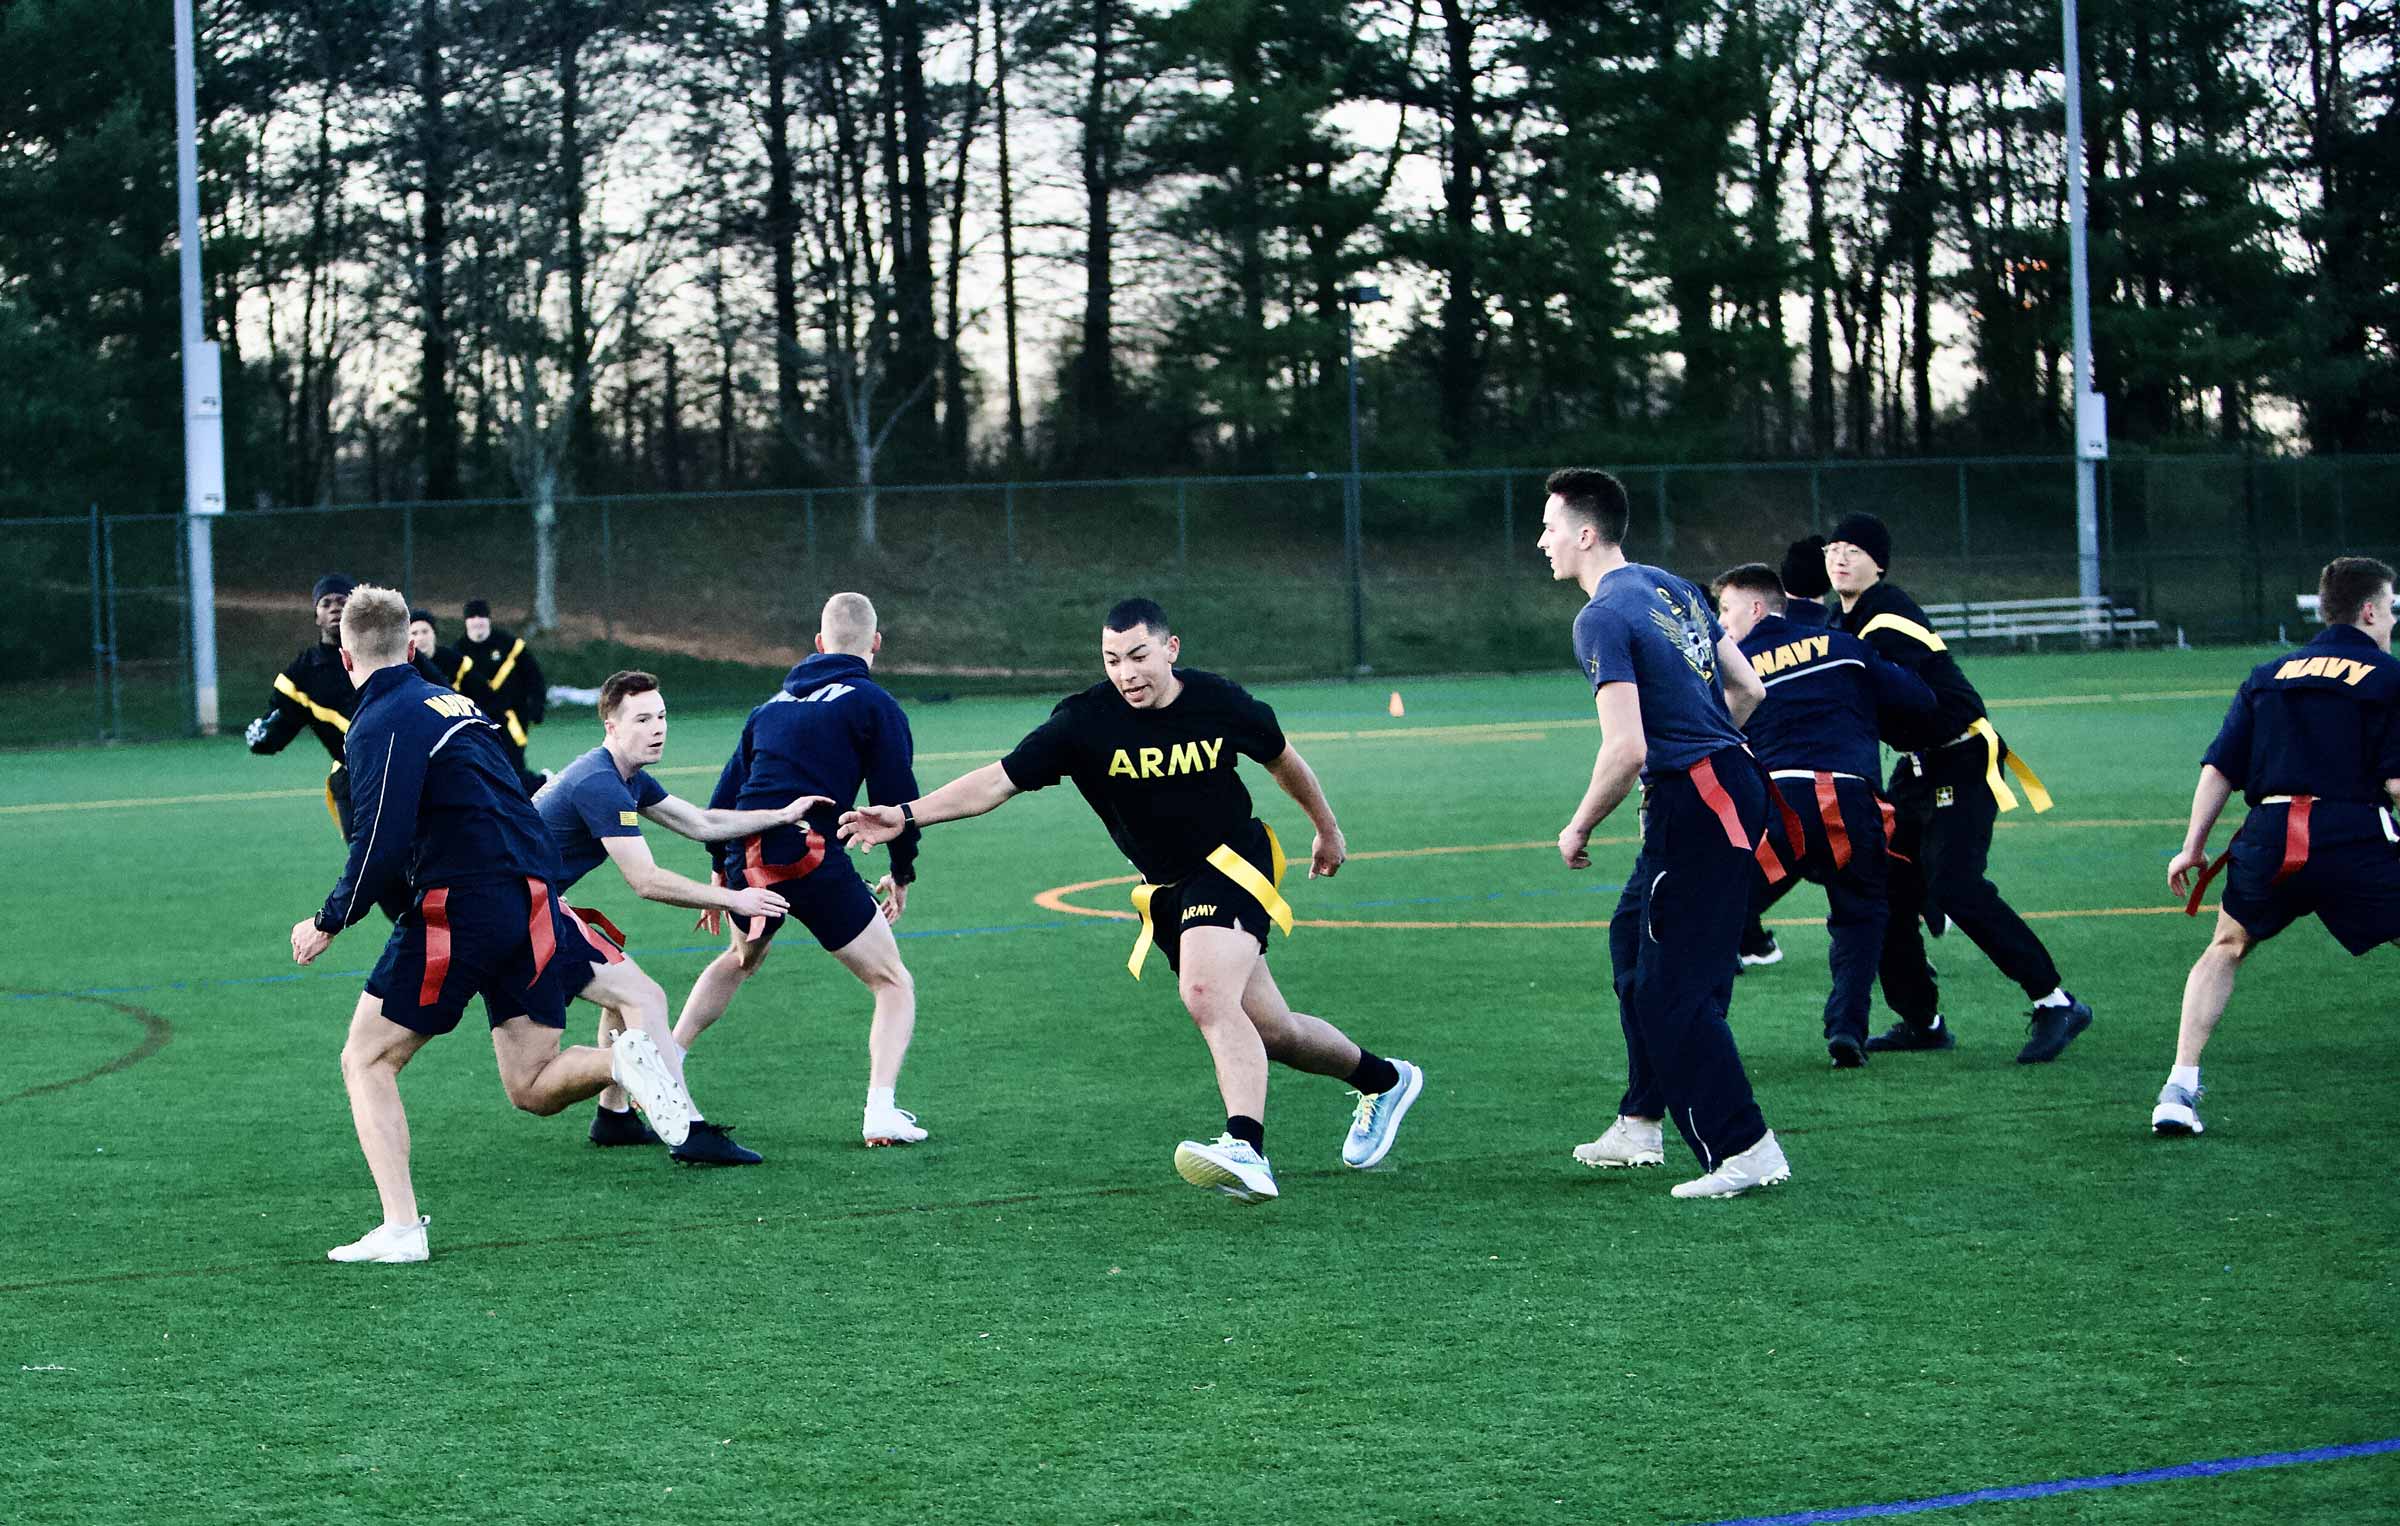 Navy Student Playing Football